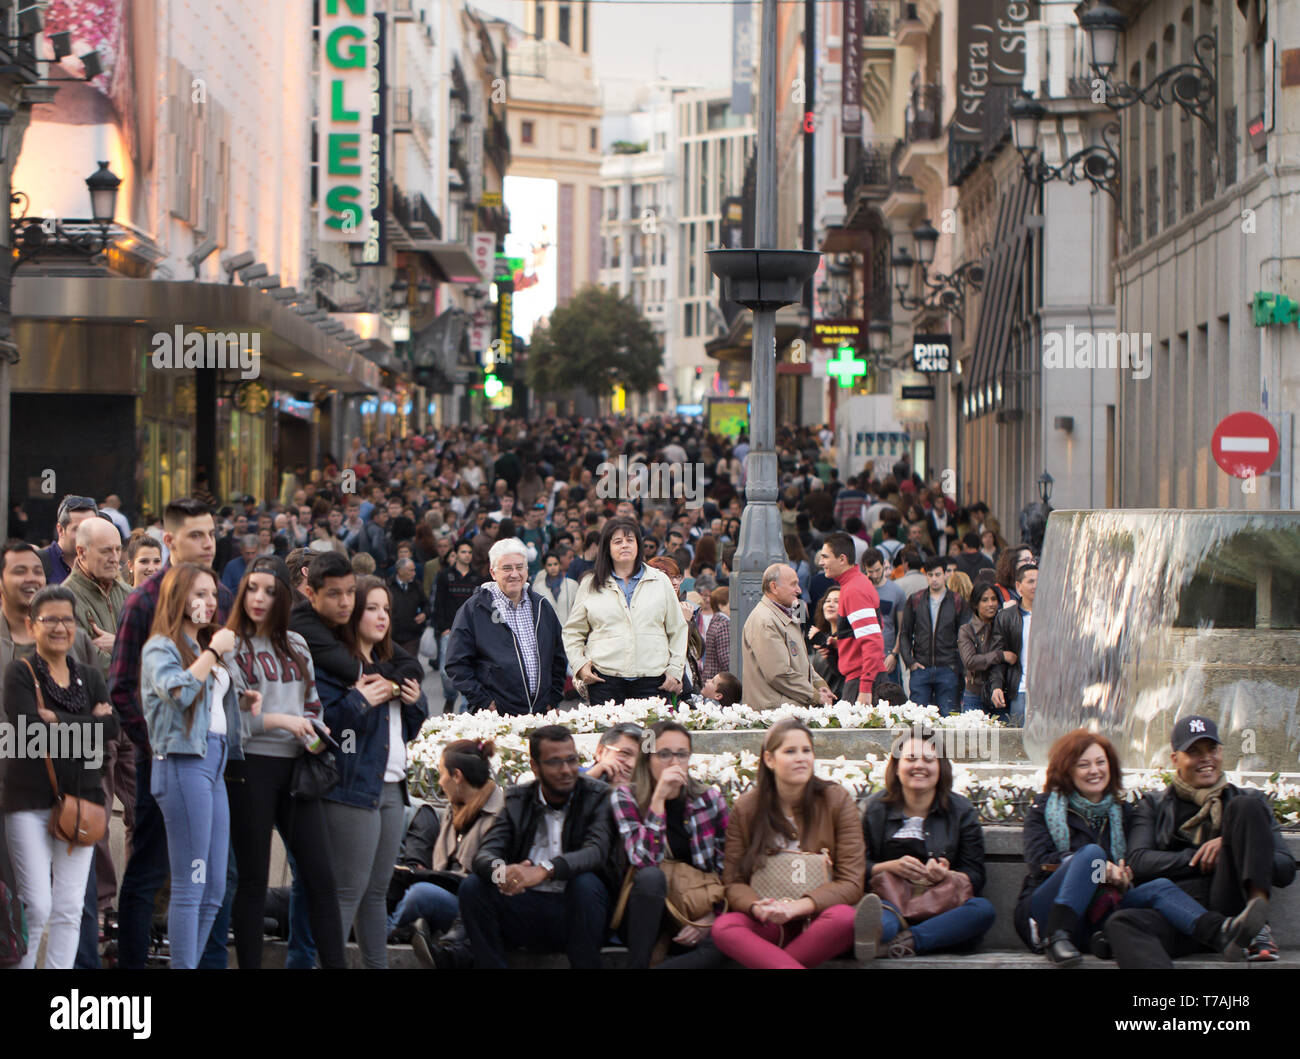 MADRID, SPAIN - APRIL 2015: crowd of people on street in Madrid on April 2015. Stock Photo